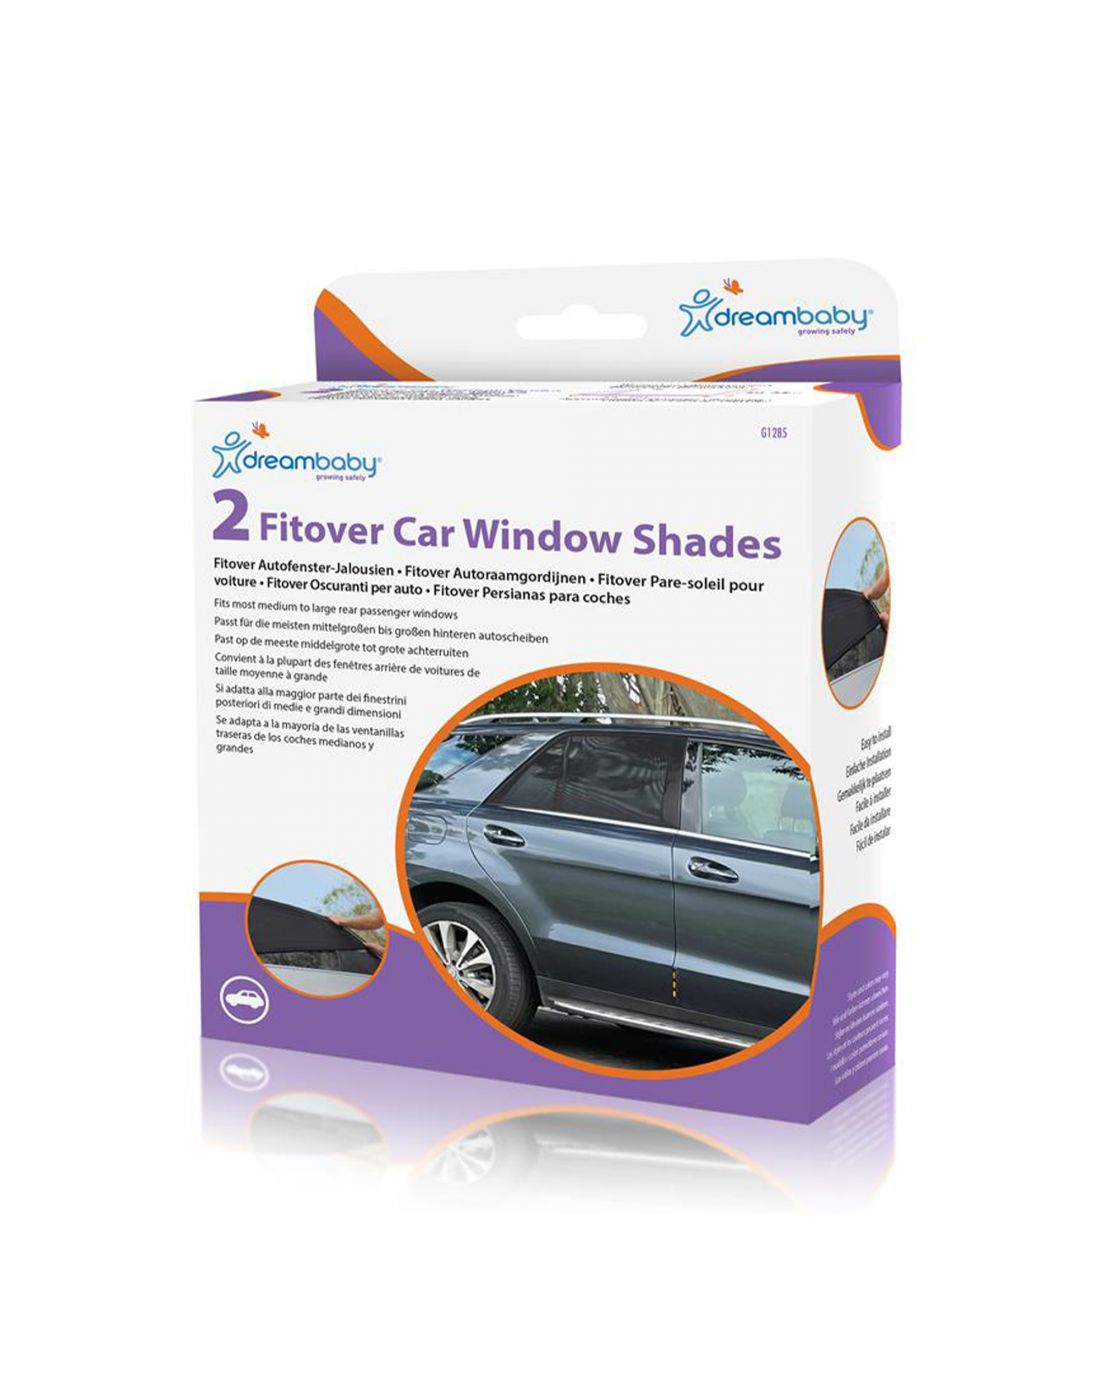 Dreambaby Fitover Car Window Shades 2 pieces